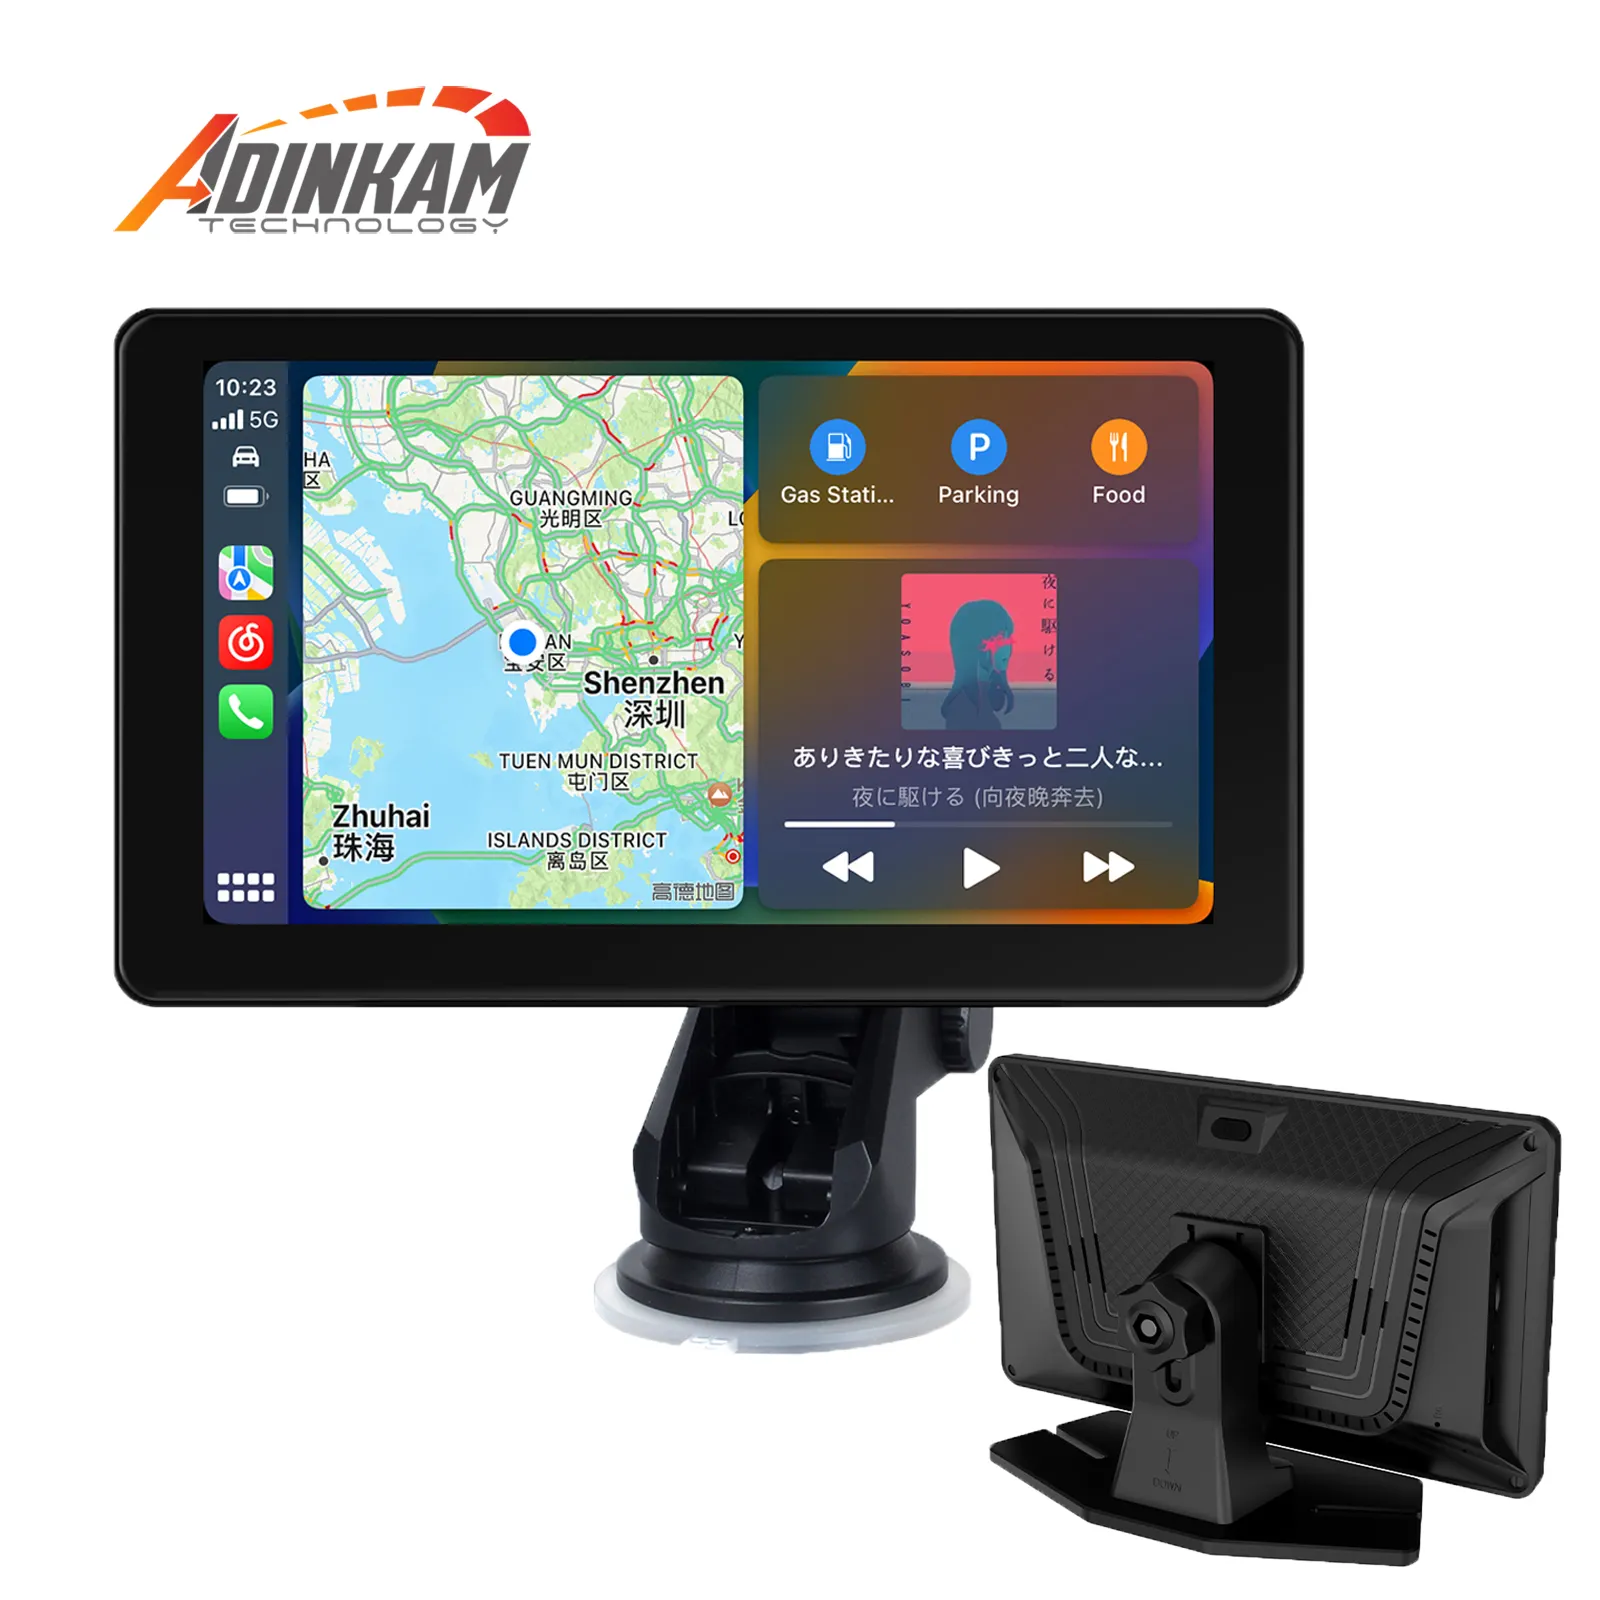 ADINKAM P70 7 Inch Universal Portable Car Player Radio Wireless Carplay Android Auto Player IPS Touch Screen Monitor BT FM AUX